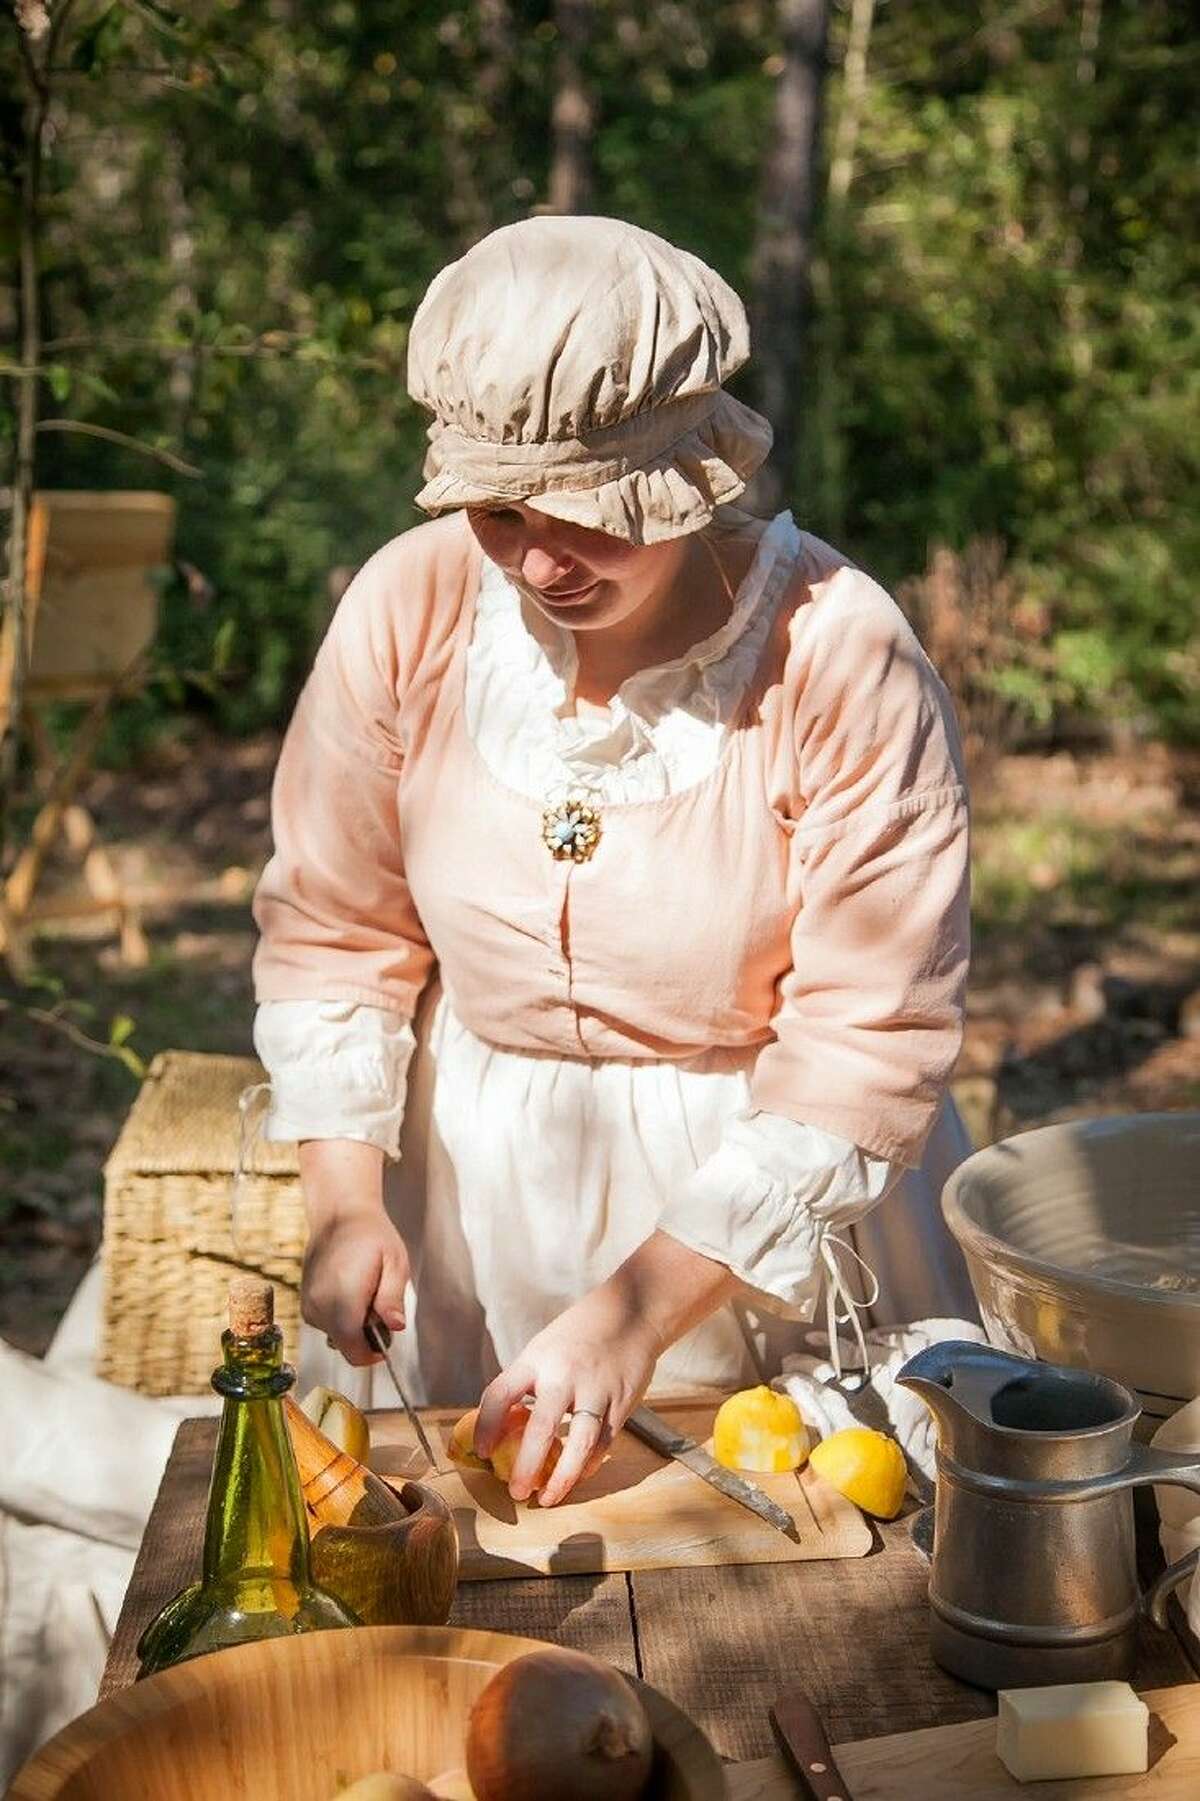 Explore a 19th century Texas settlement during the annual Homestead Heritage Day at Jesse H. Jones Park & Nature Center Saturday, Feb. 13 from 10 a.m. to 4 p.m.